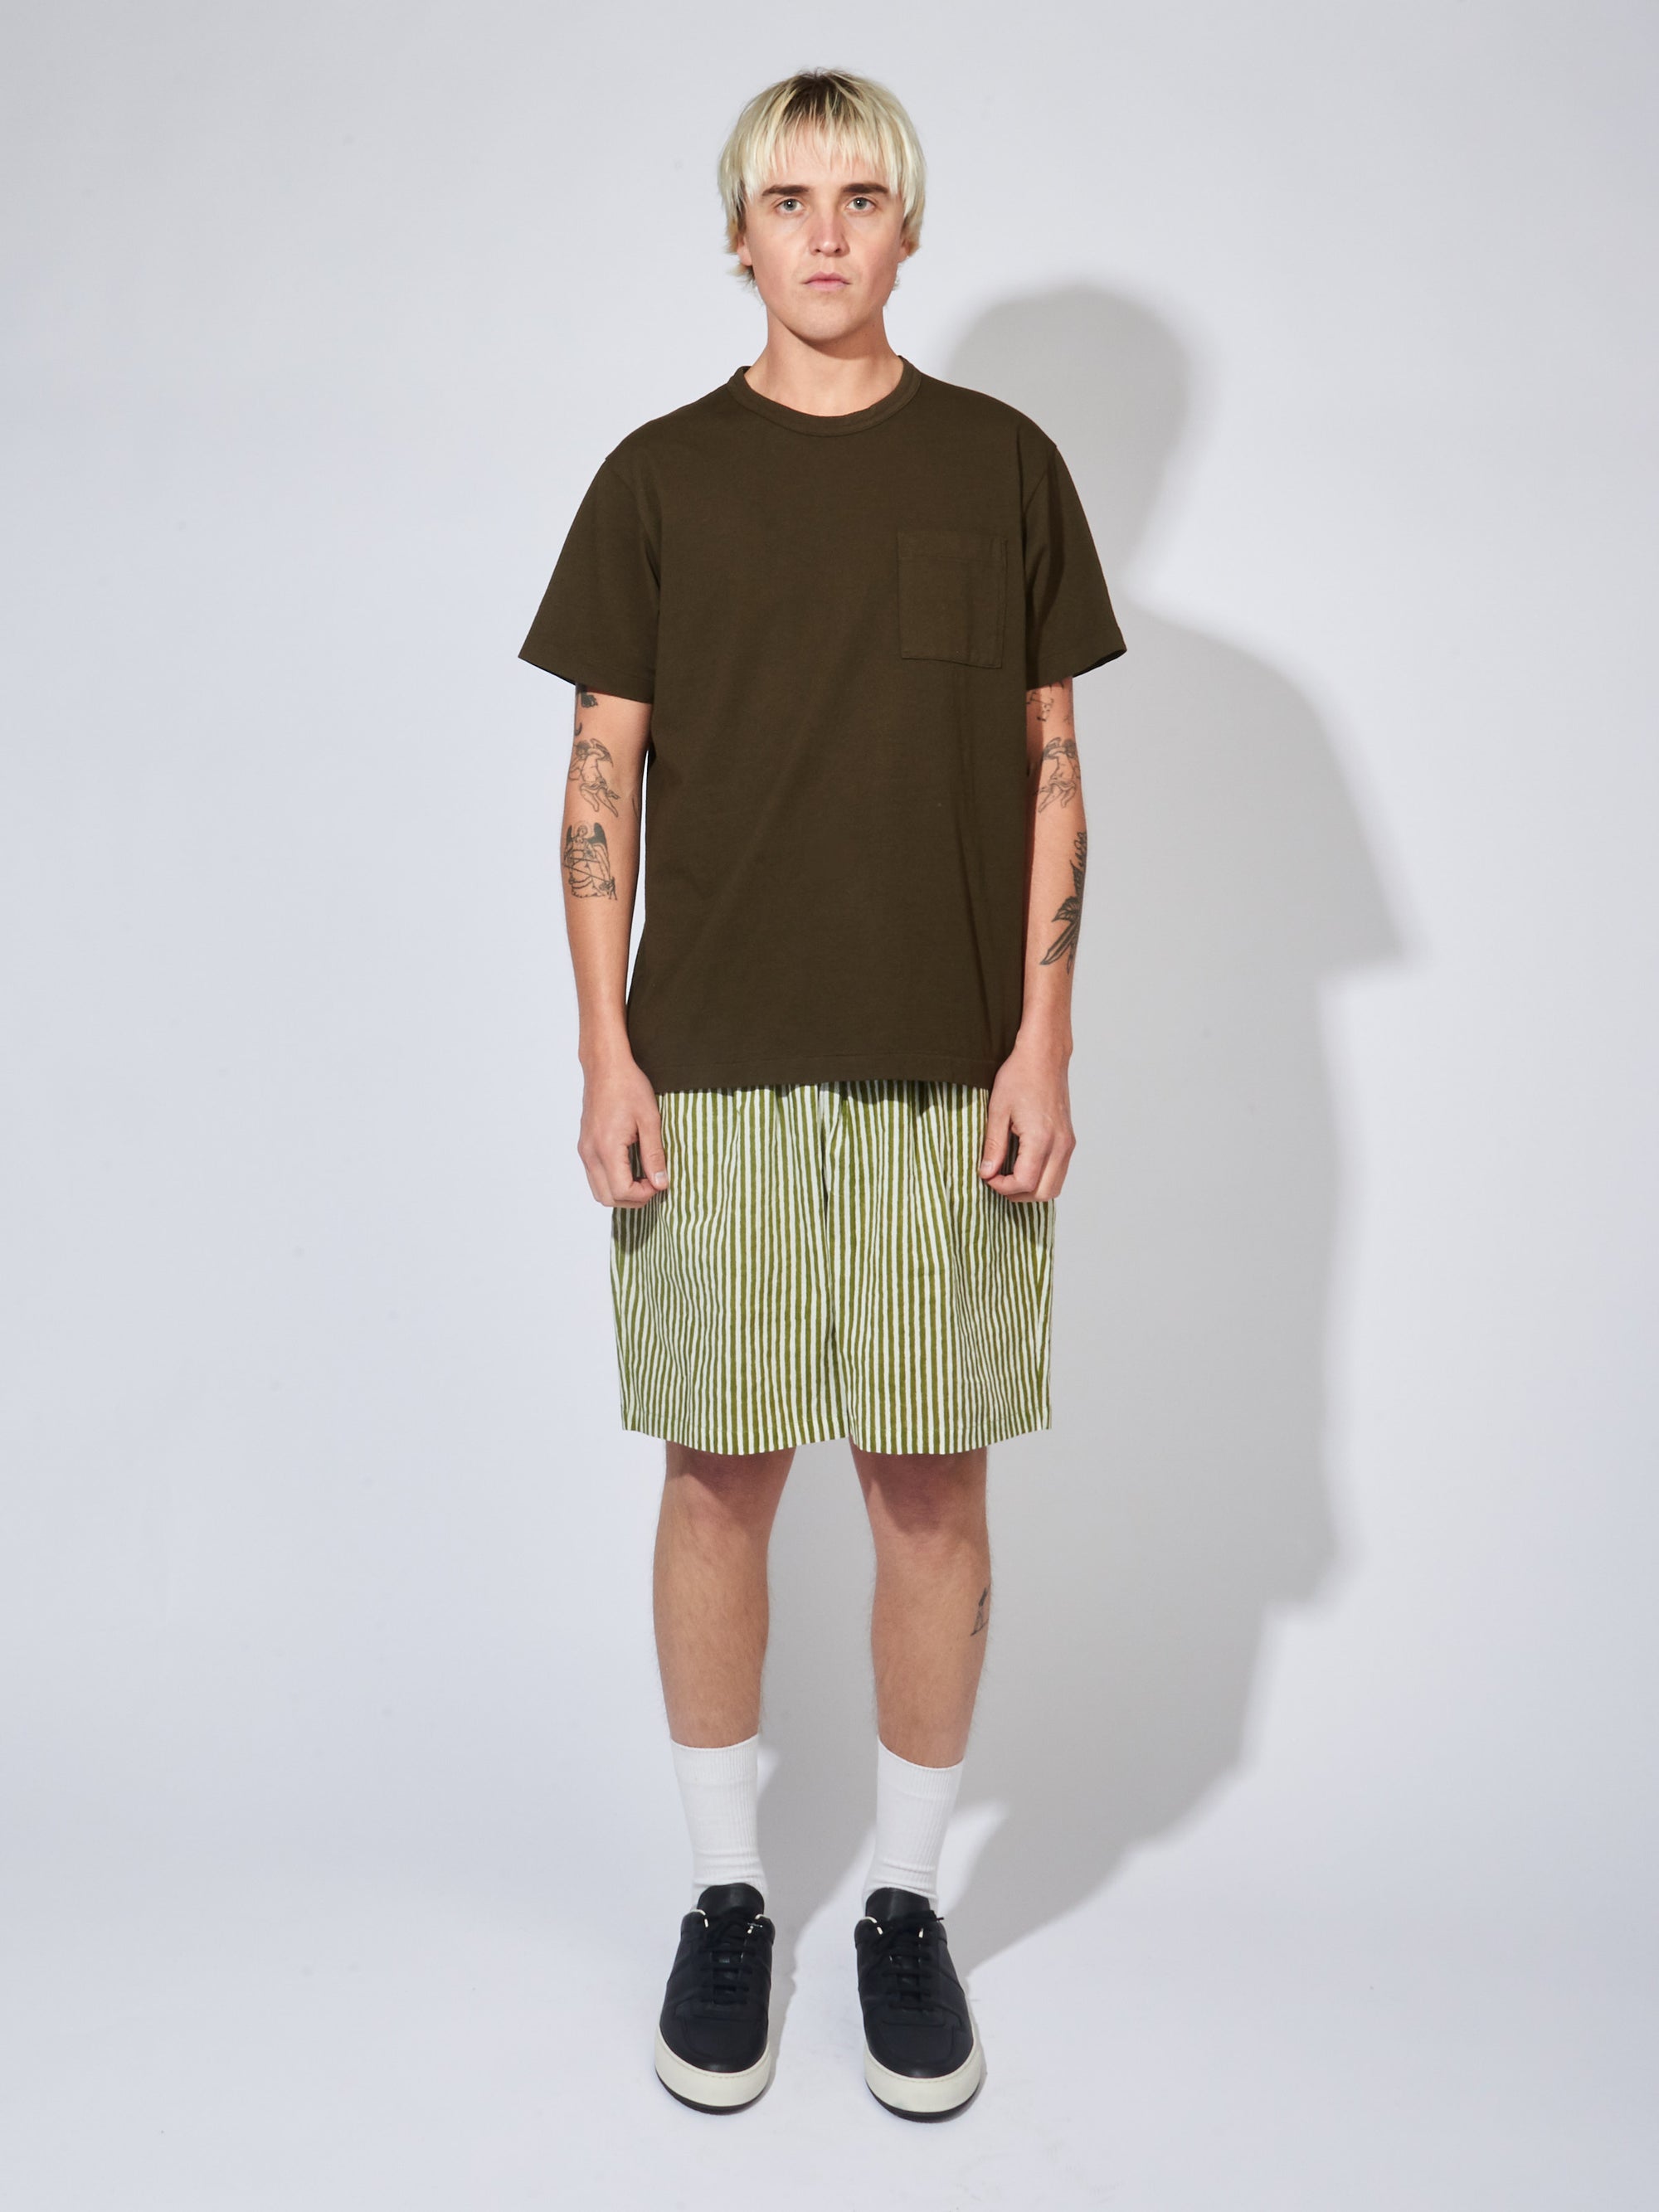 Selected Homme oversized t-shirt in heavy cotton black - BLACK